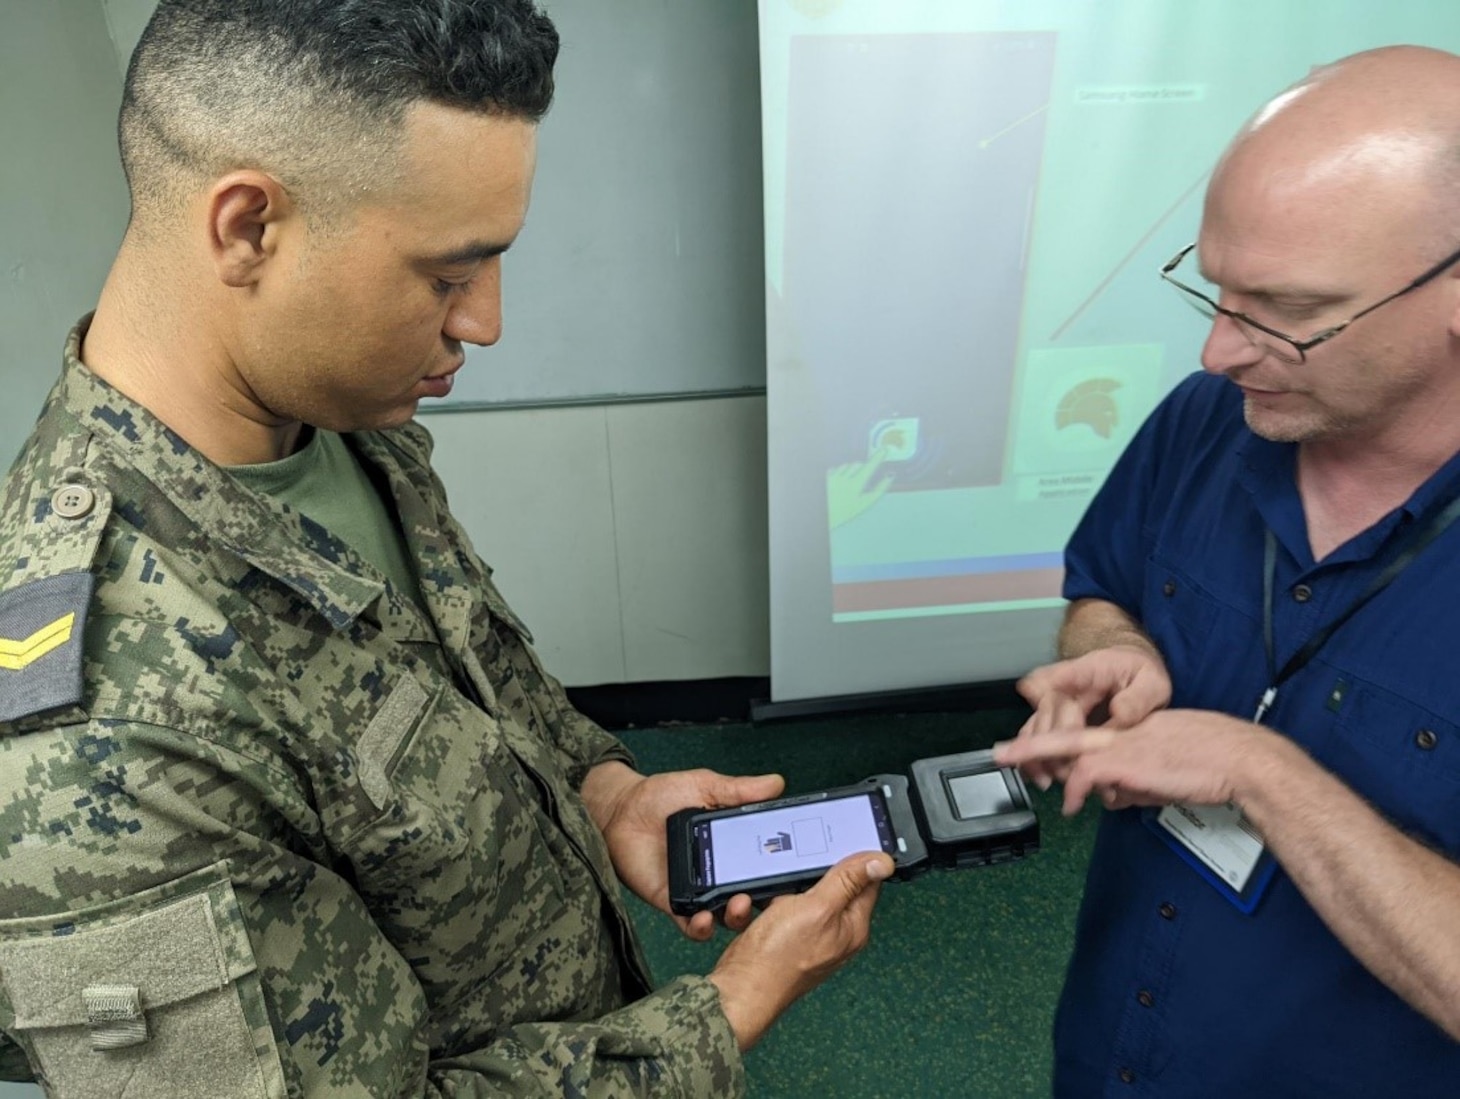 Biometric operations specialist Robert Shelton, right, assigned to Naval Criminal Investigative Service, Technical Services Field Office - Identity Activities branch, Headquarters Quantico, Virginia, demonstrates biometrical enrollments to Tunisian Navy Staff Sergeant Mourad Bel Haj while explaining how to use a fingerprint capture device to take biometric information during exercise Phoenix Express 2022 in Bizerte, Tunisia, May 24, 2022. Phoenix Express 22, conducted by U.S. Naval Forces Africa, is a maritime exercise designed to improve cooperation among participating nations in order to increase maritime safety and security in the Mediterranean.